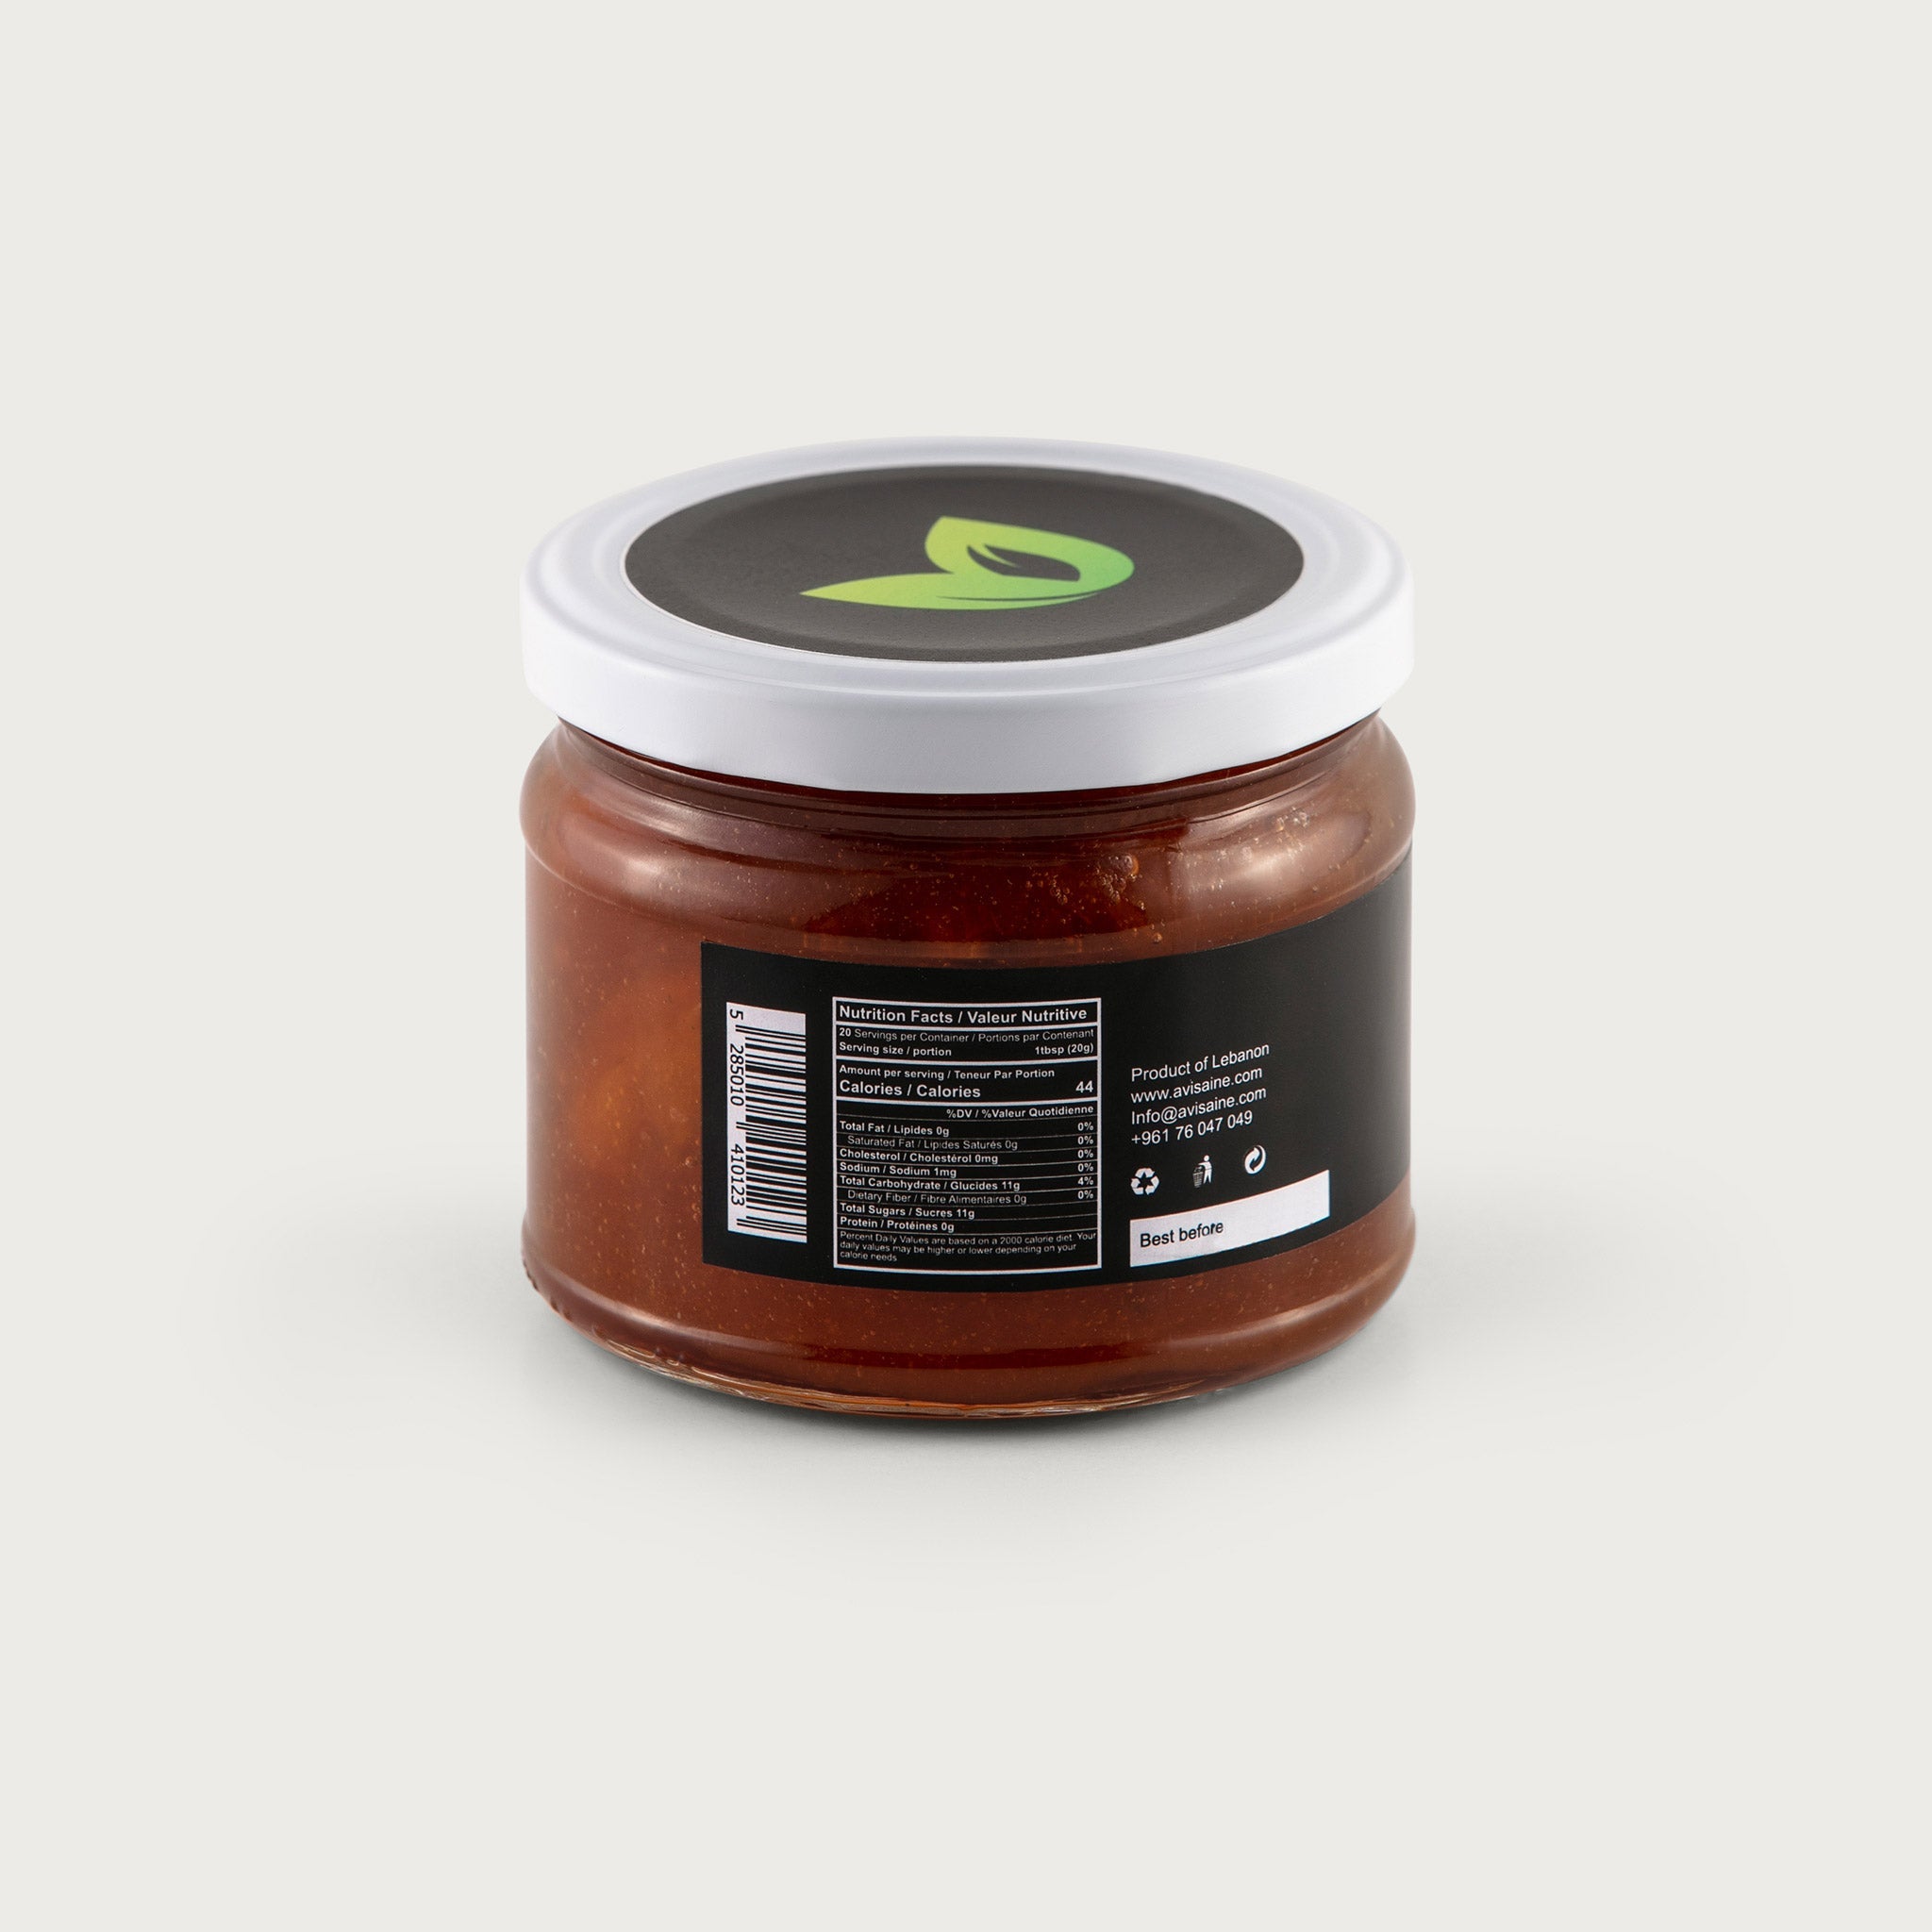 A clear 14 oz. jar shows the rich honey colored Apricot jam with particulates. The label is black and features the AviSaine logo in green.